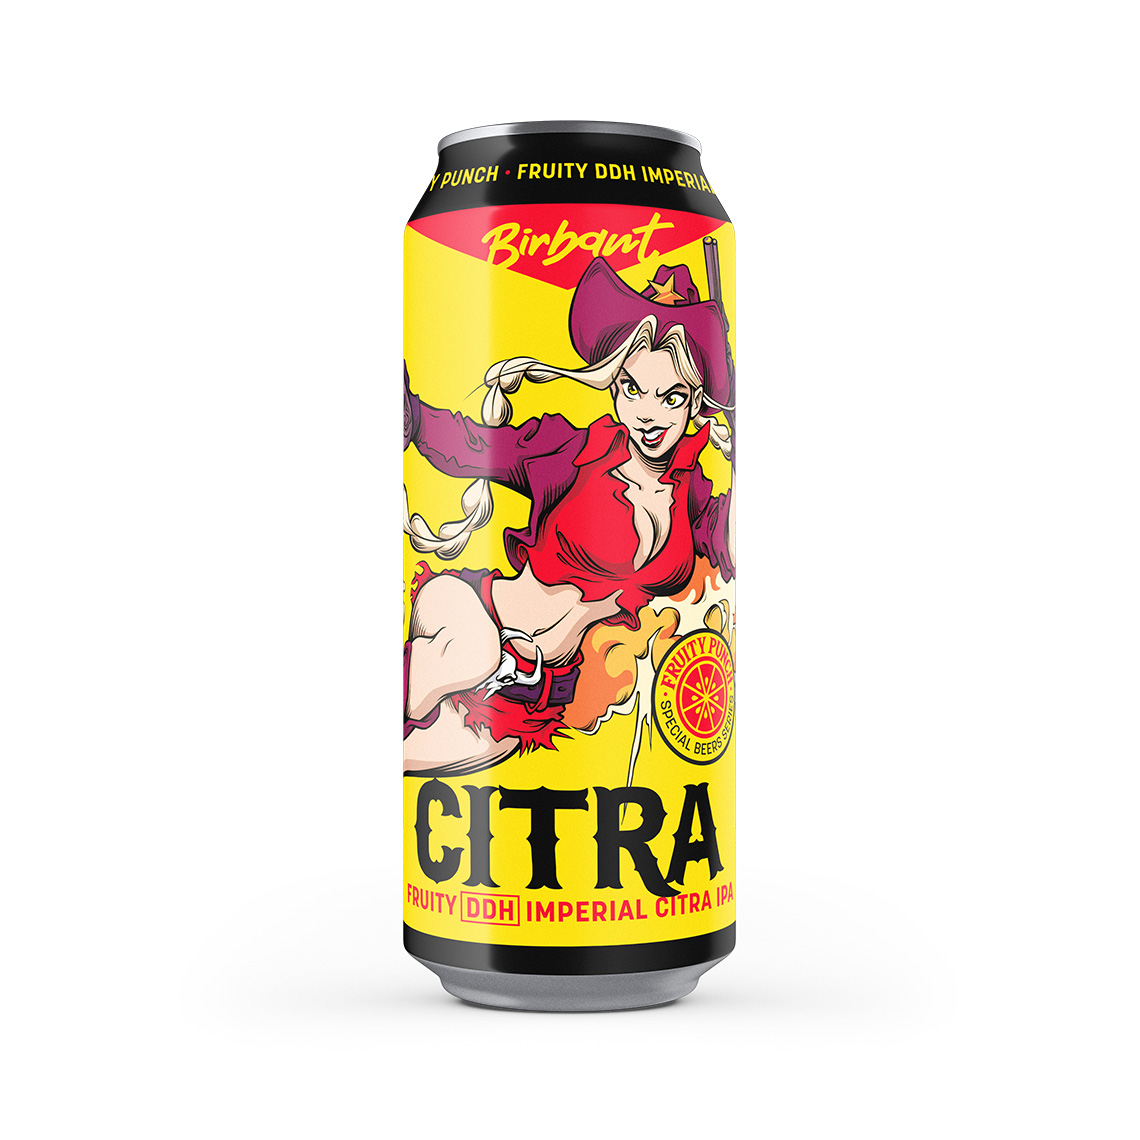 Fruity DDH Imperial Citra IPA